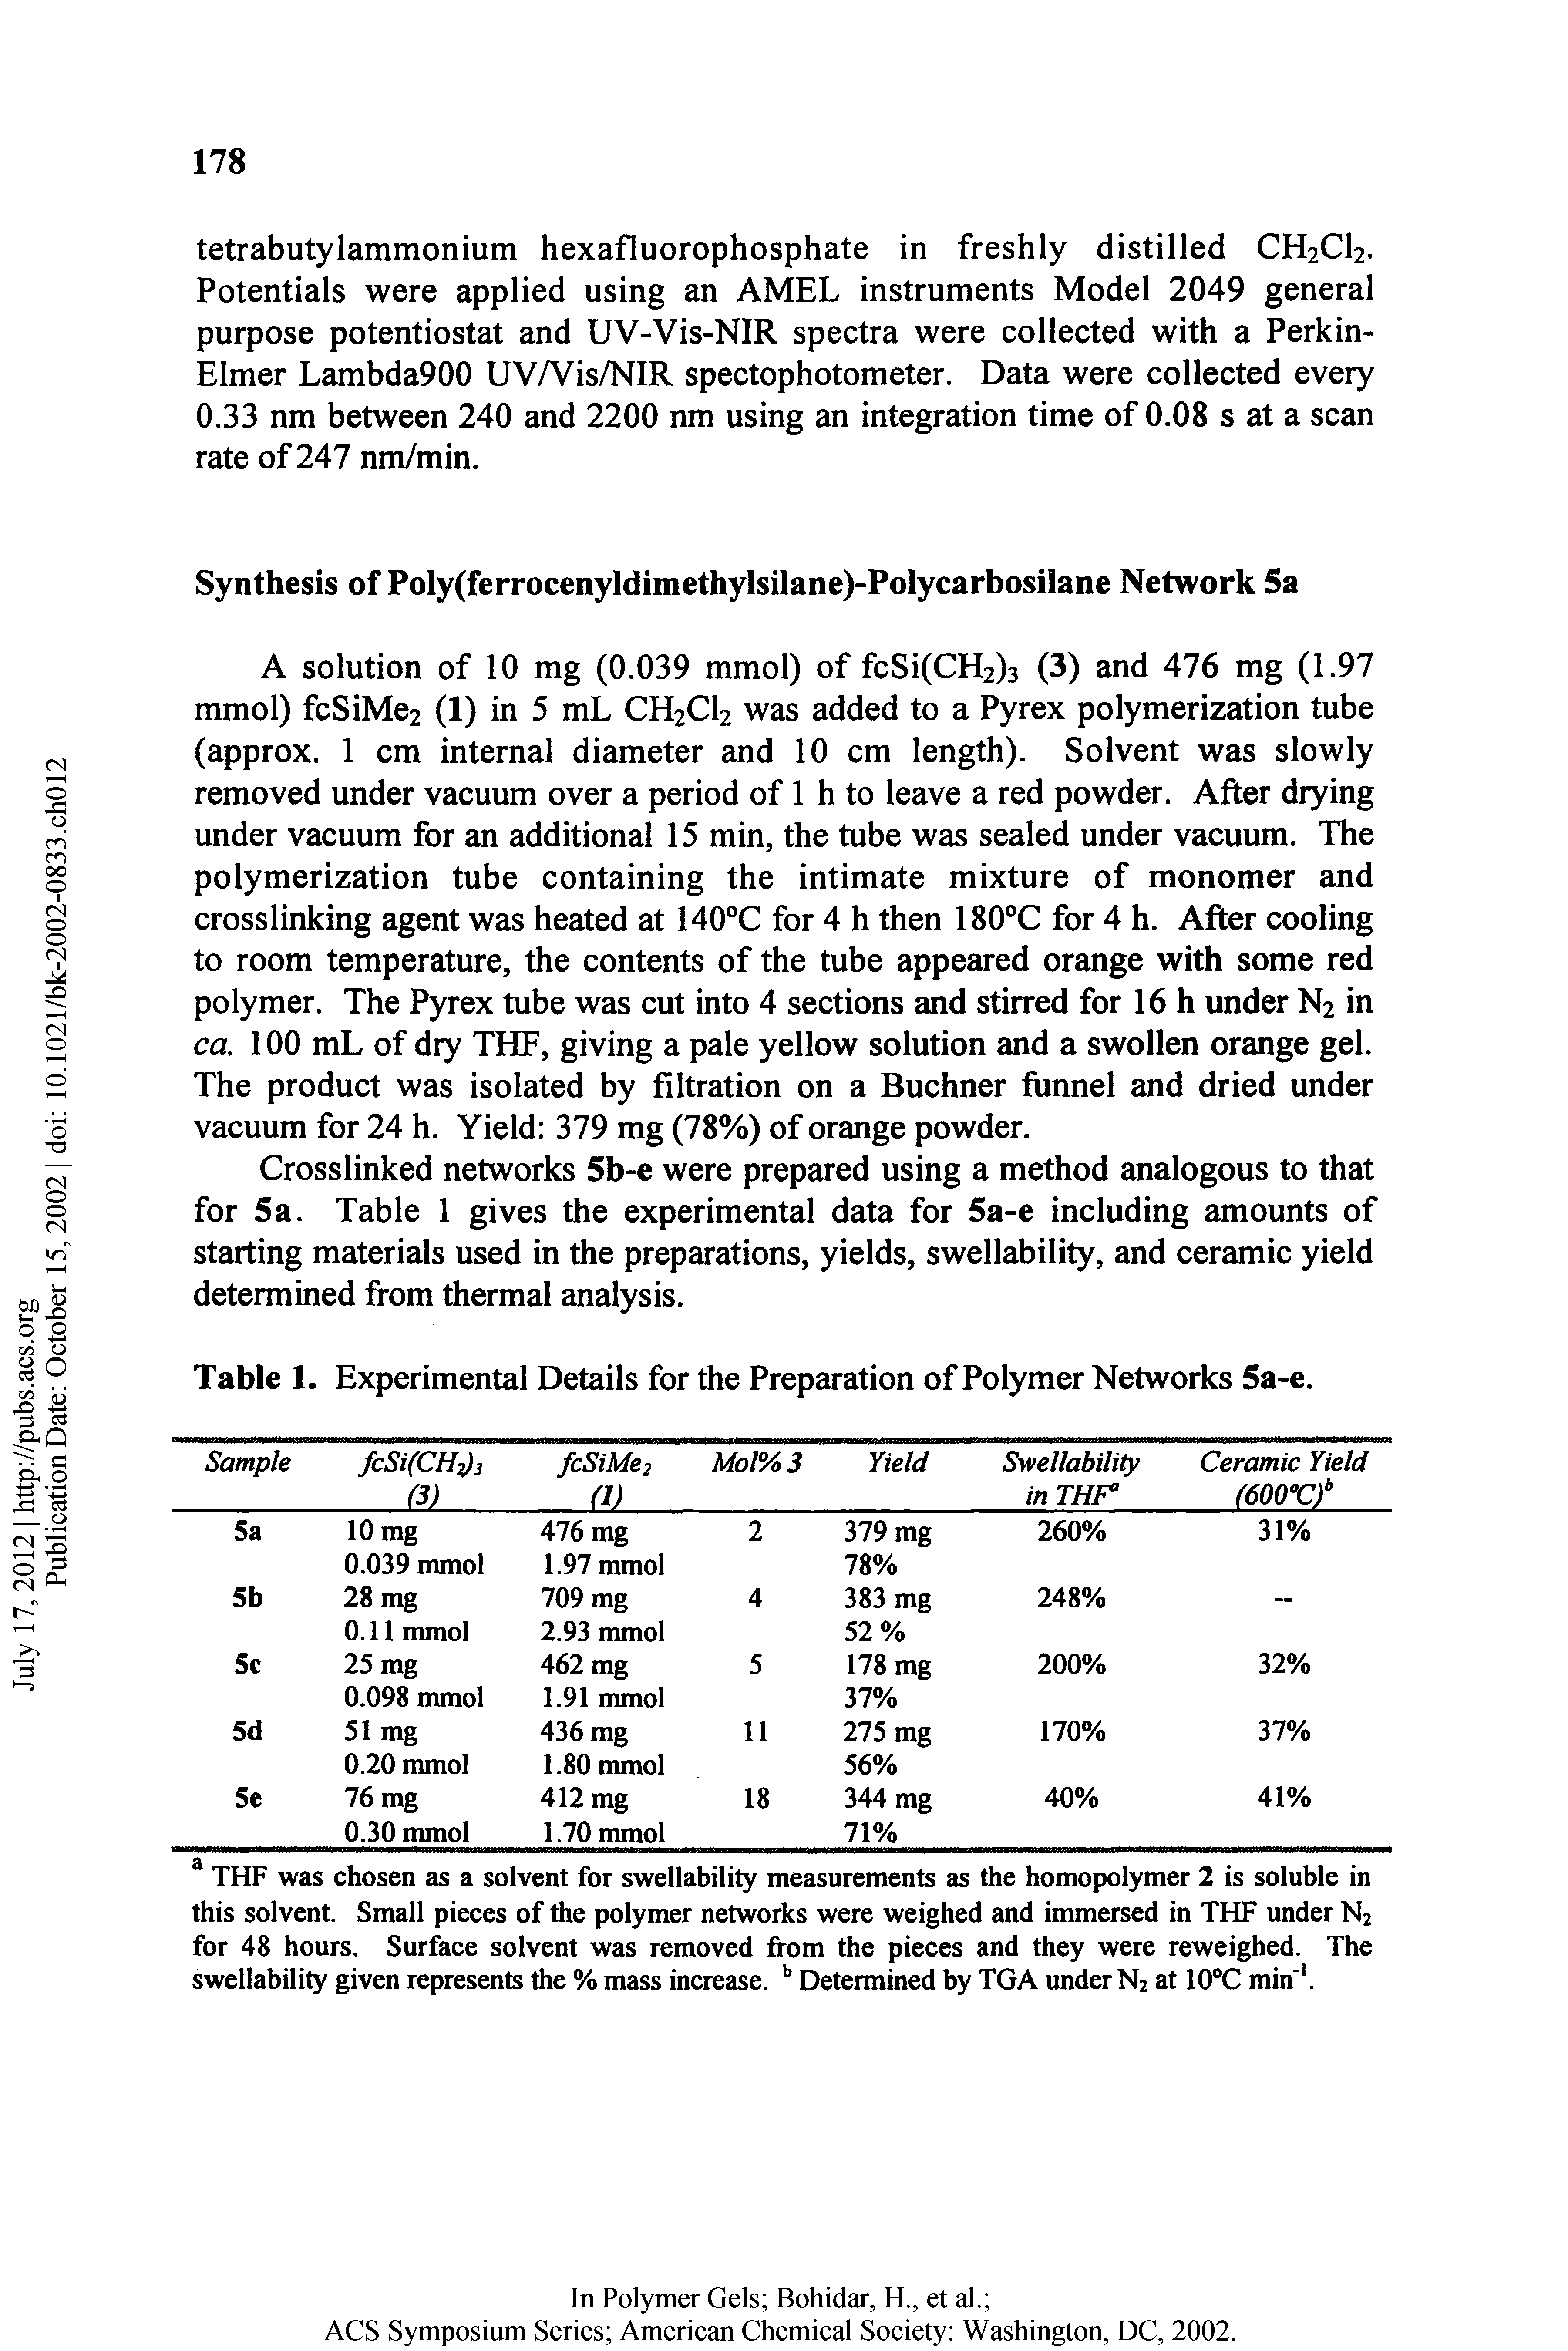 Table 1. Experimental Details for the Preparation of Polymer Networks 5a-e.